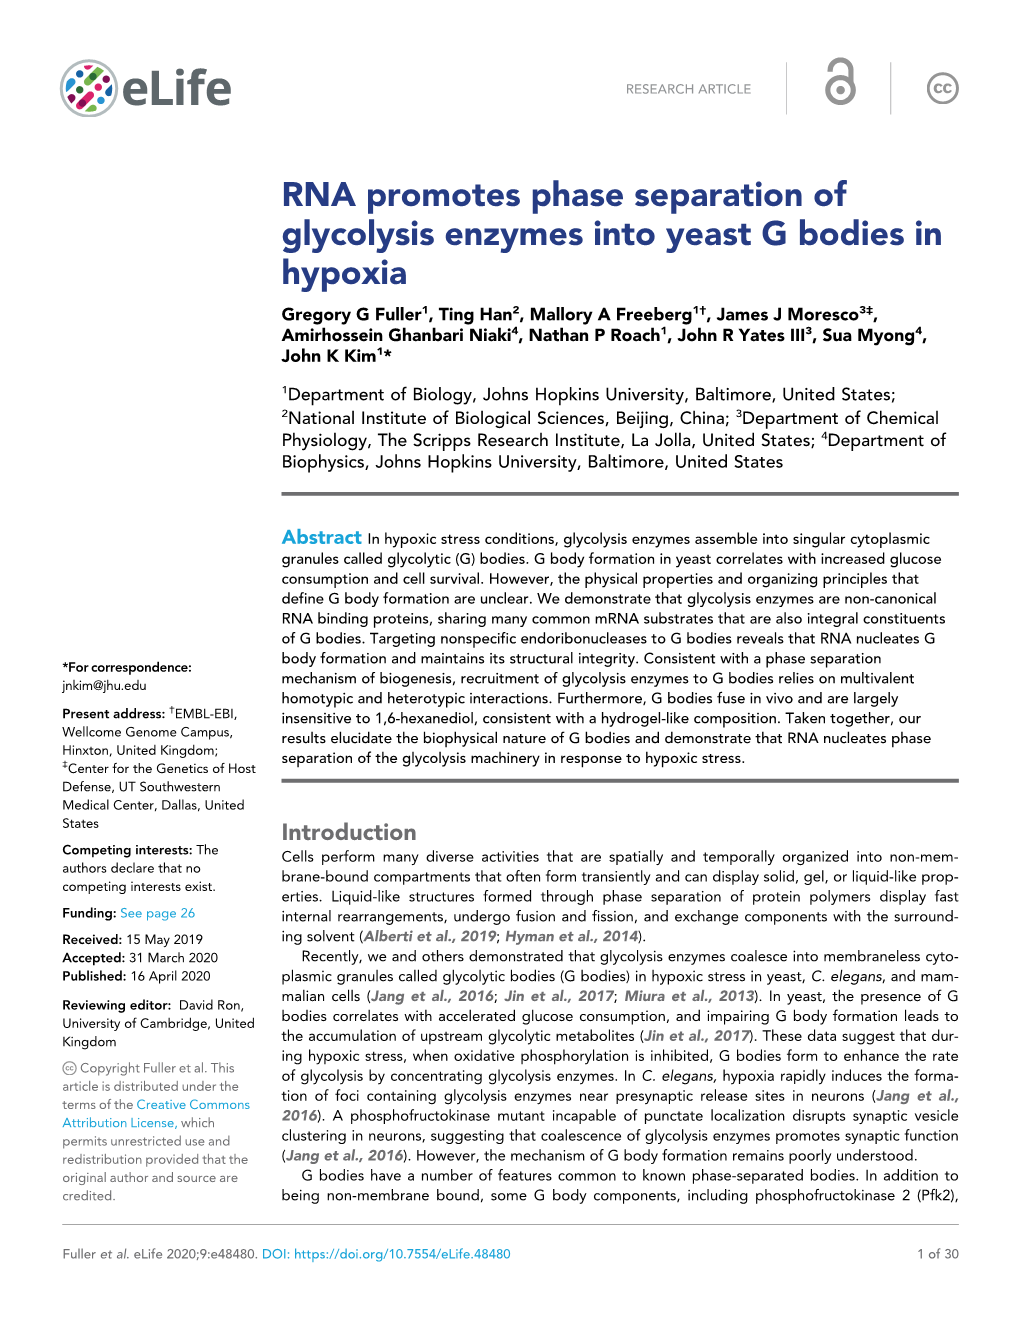 RNA Promotes Phase Separation of Glycolysis Enzymes Into